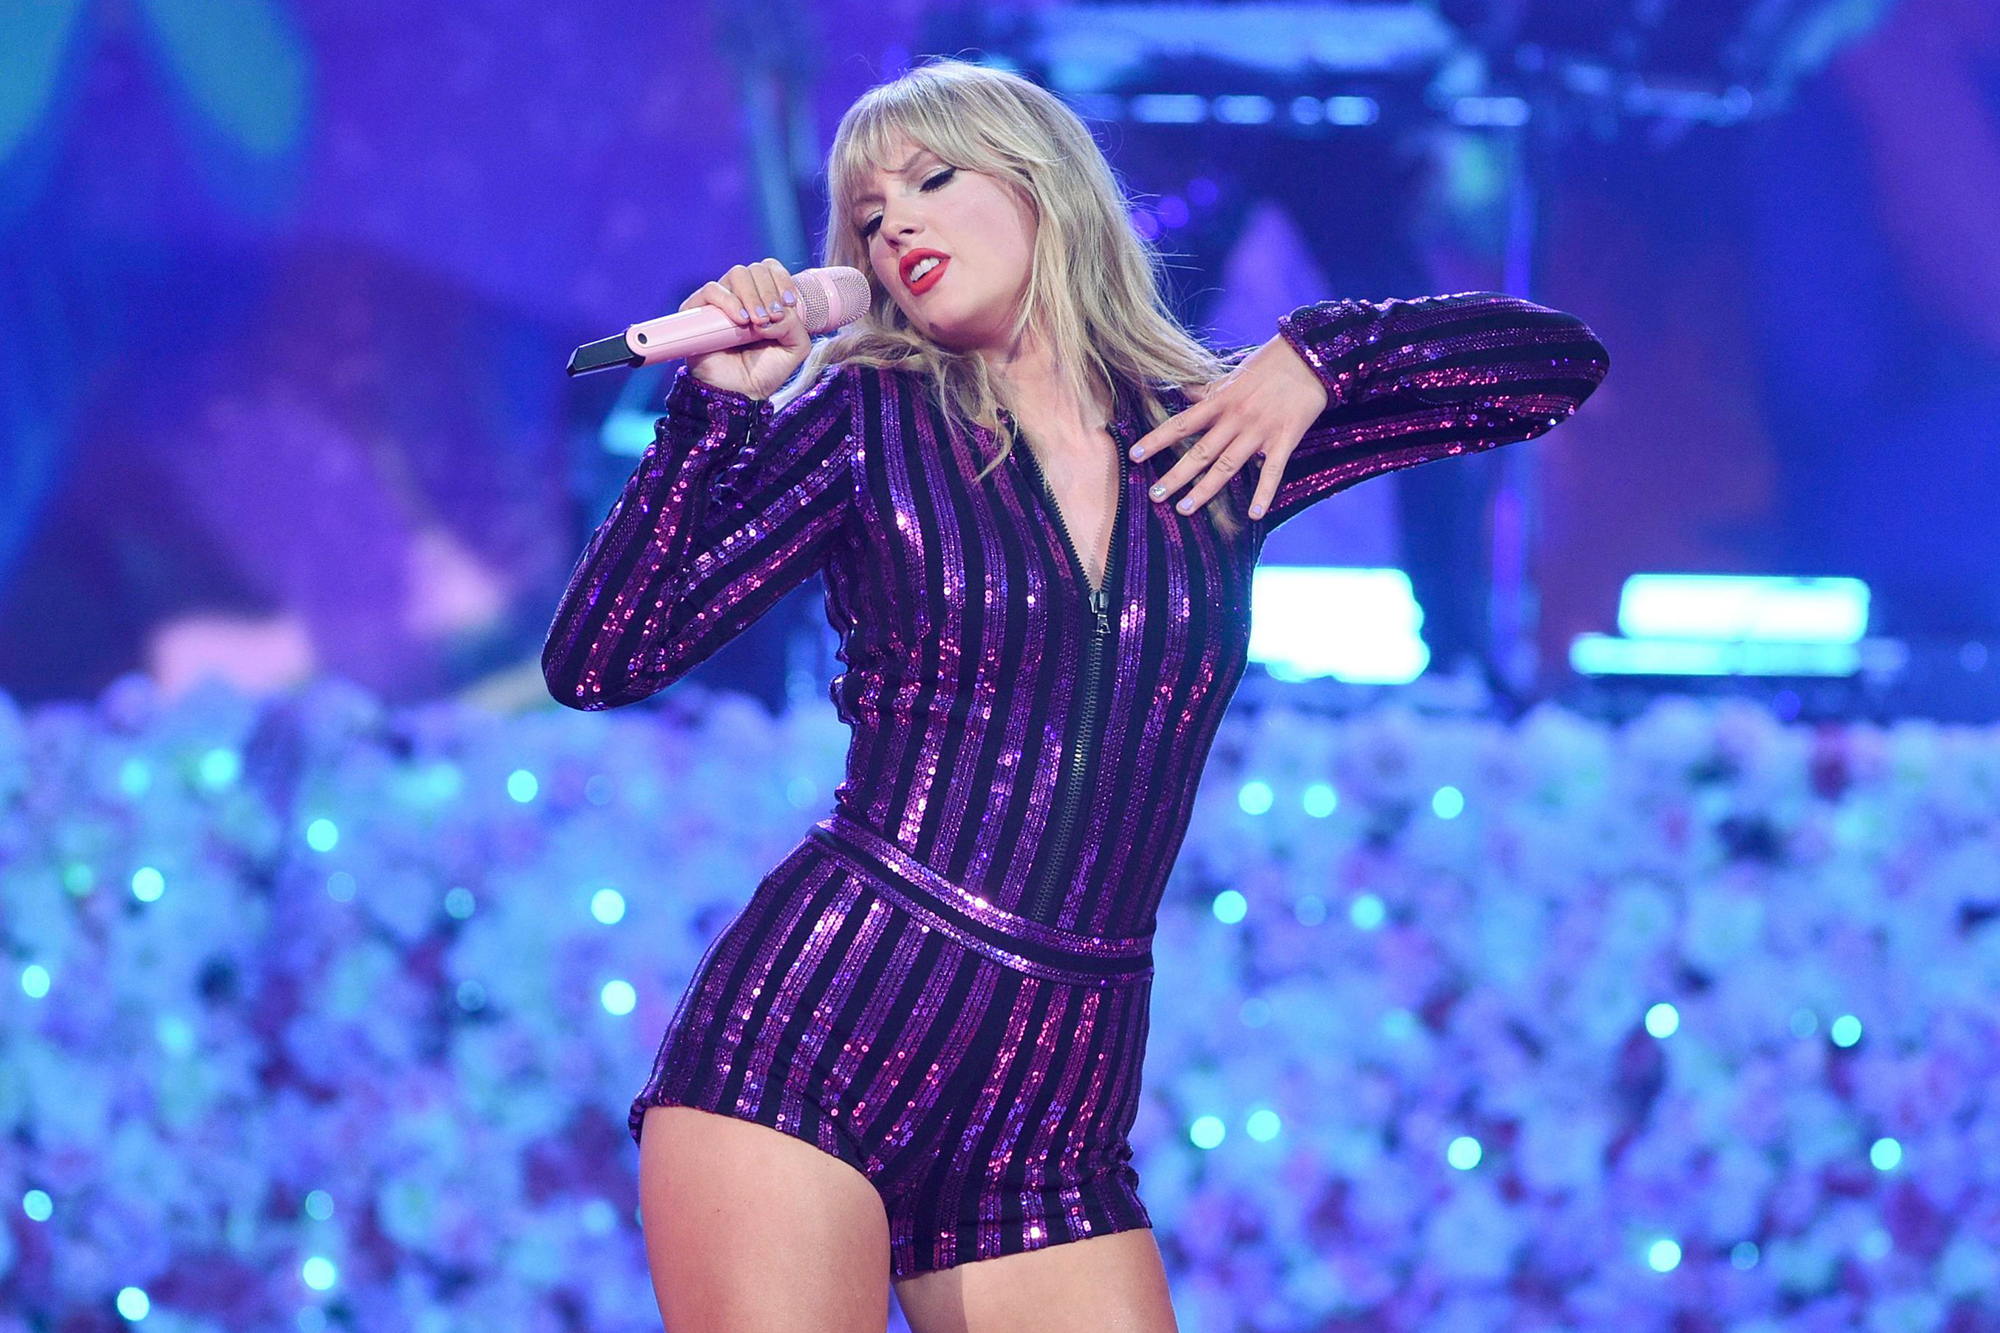 Taylor Swift’s ‘Lover’: Breaking Down the Most Telling Lyrics